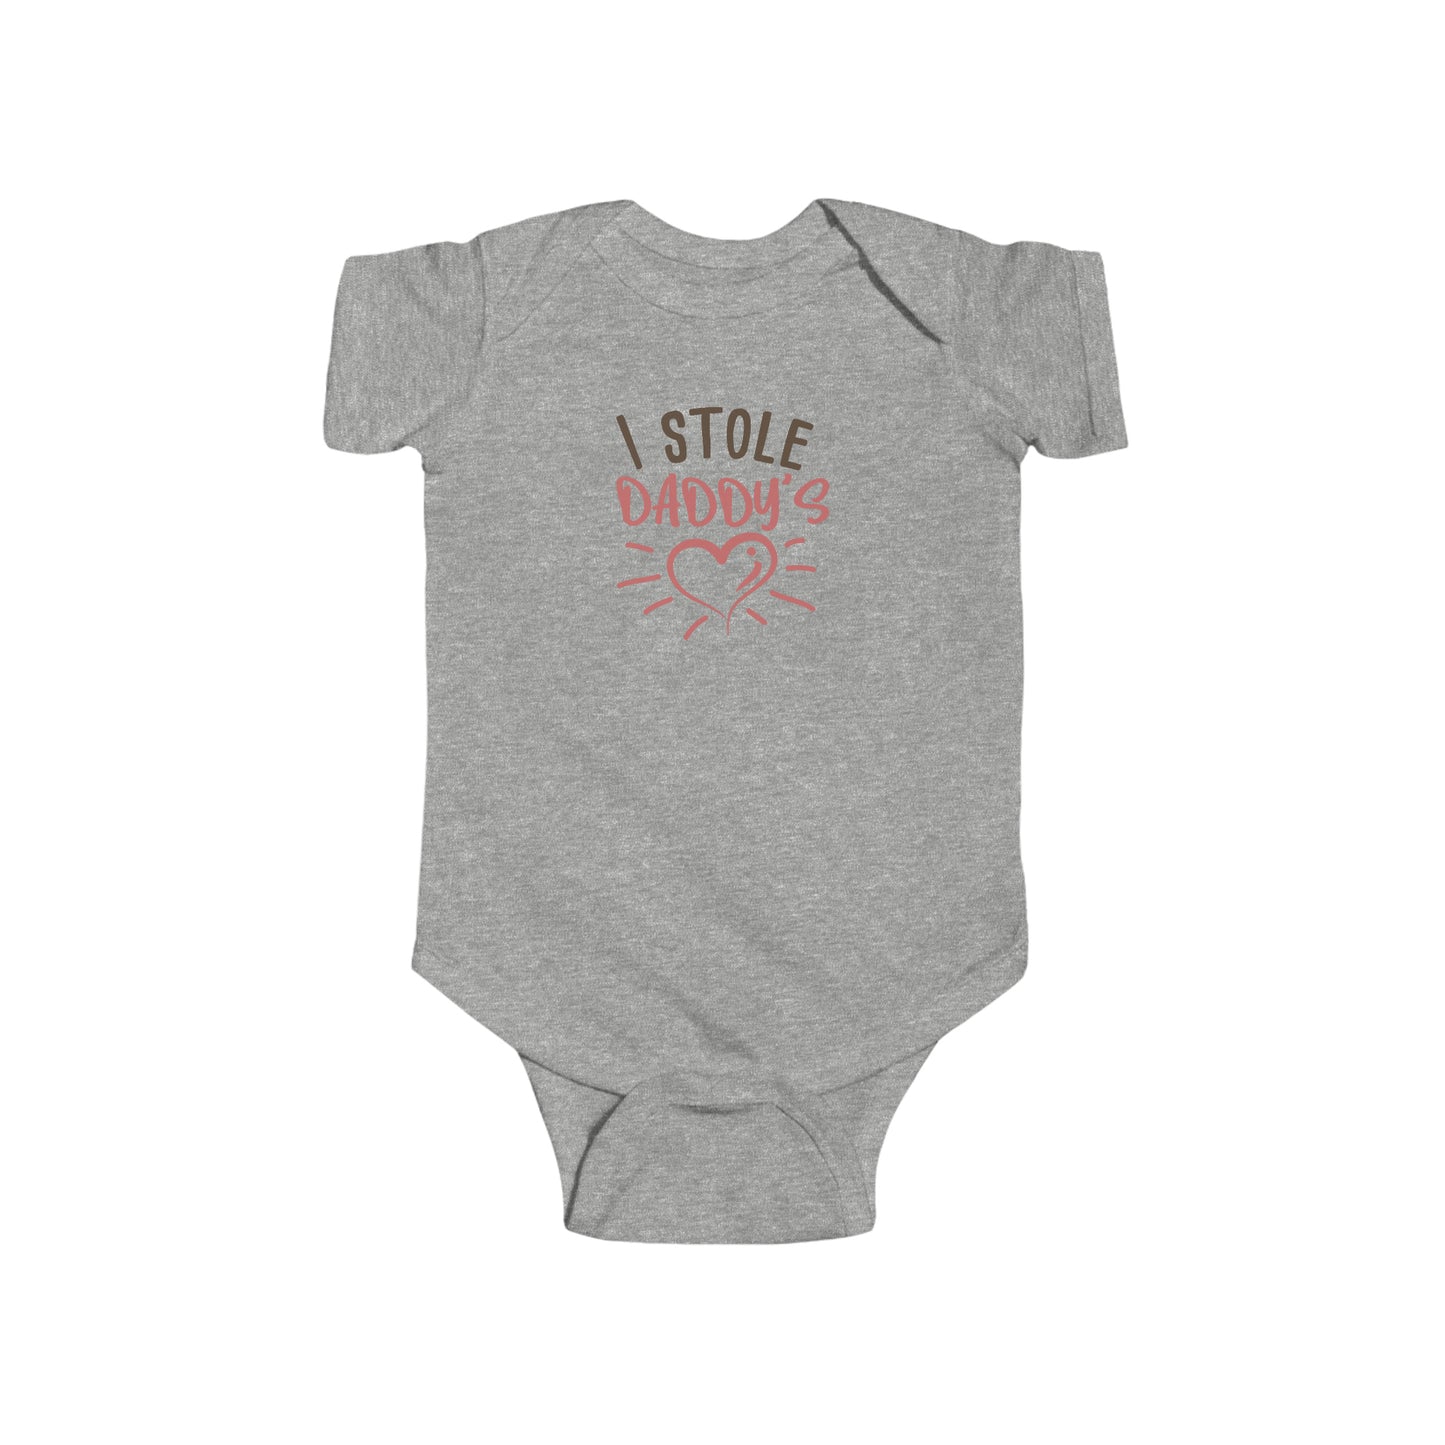 I STOLE DADDY'S HEART JERSEY ONSIE